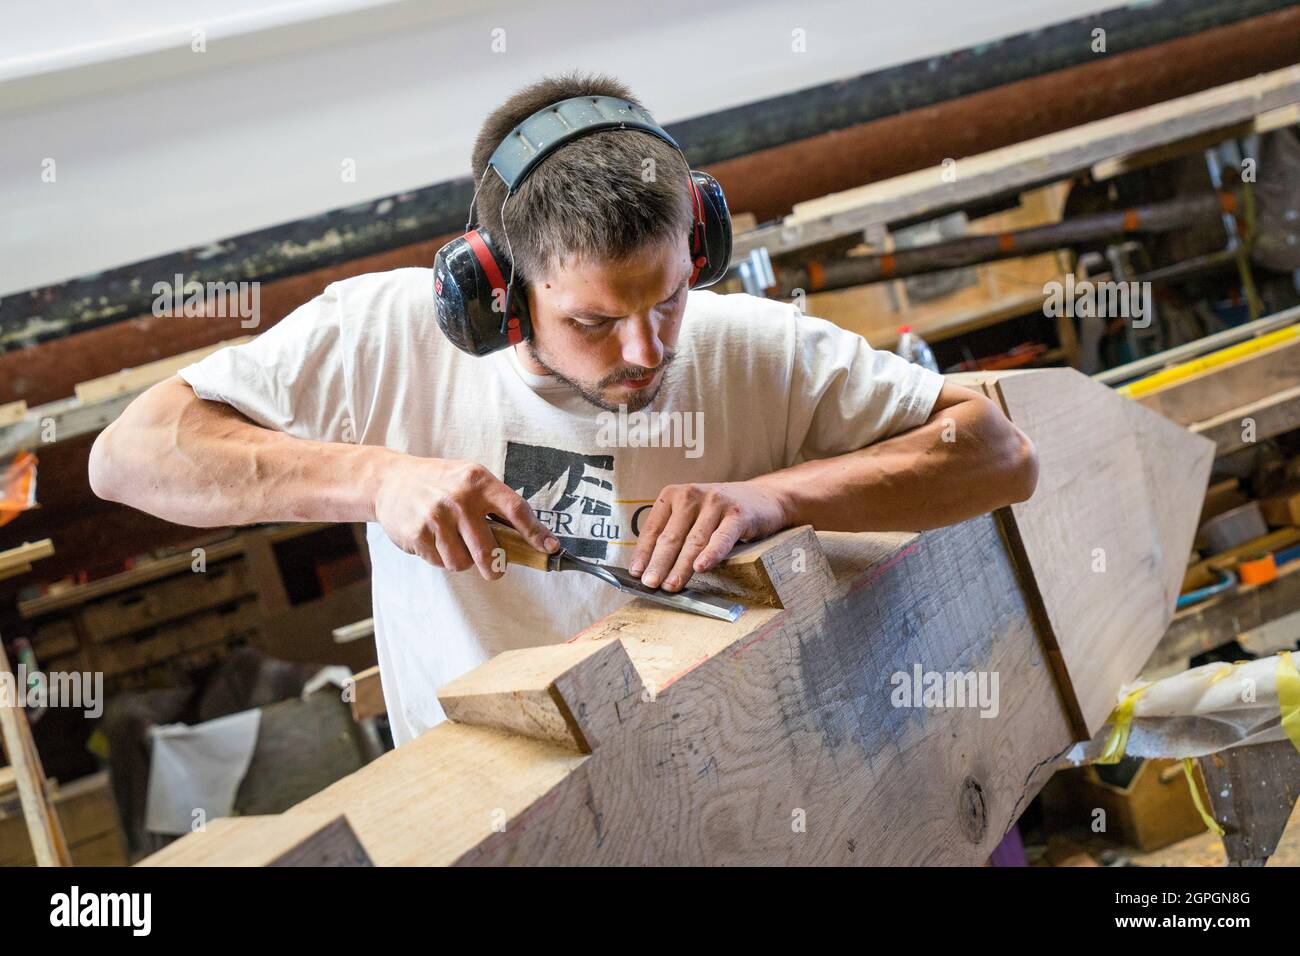 France, Finistere, Brest, Guip Shipyard, a marine carpenter works with a wood chisel Stock Photo